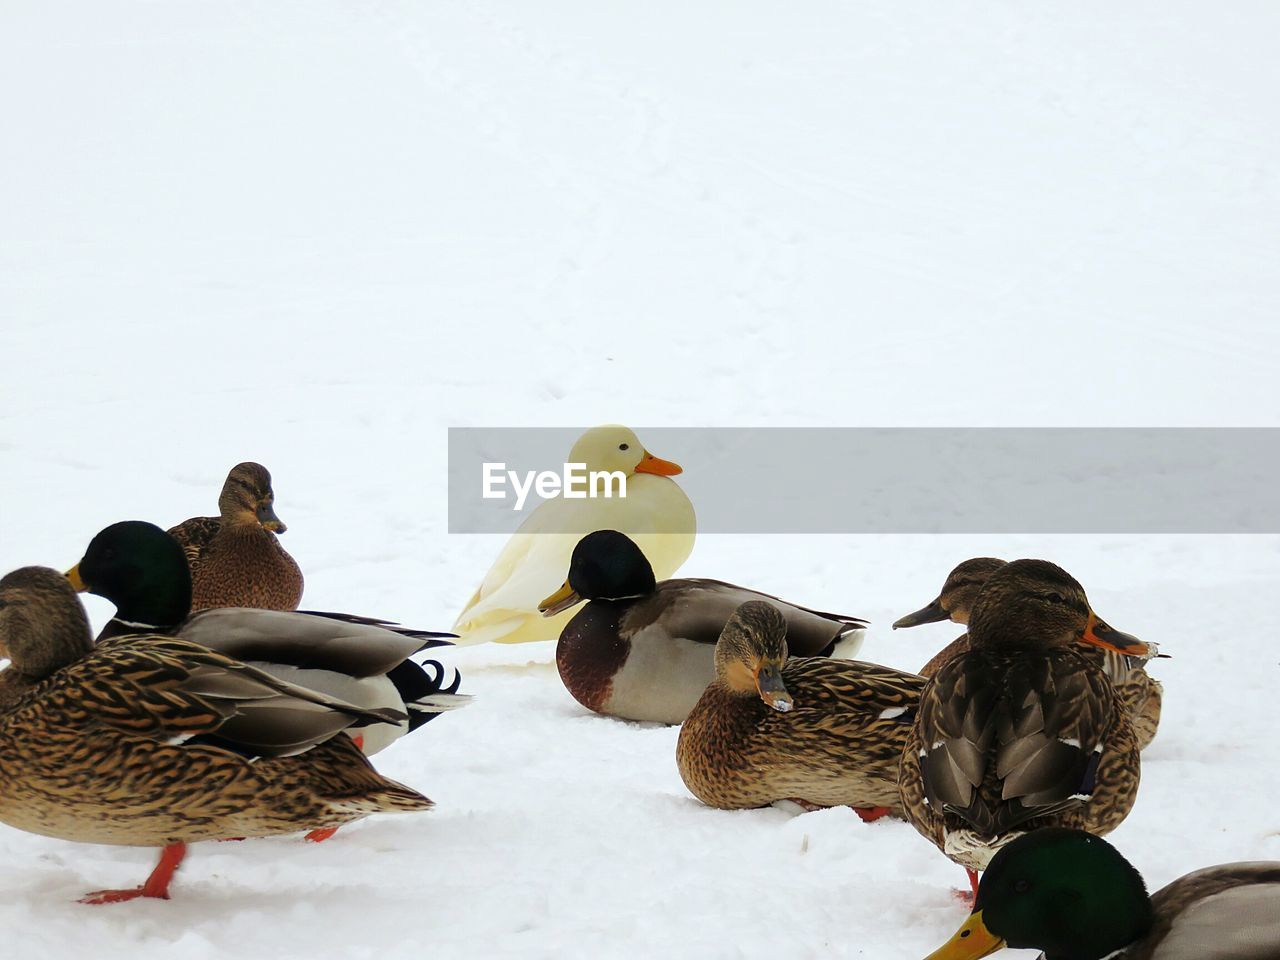 Ducks on snow covered field